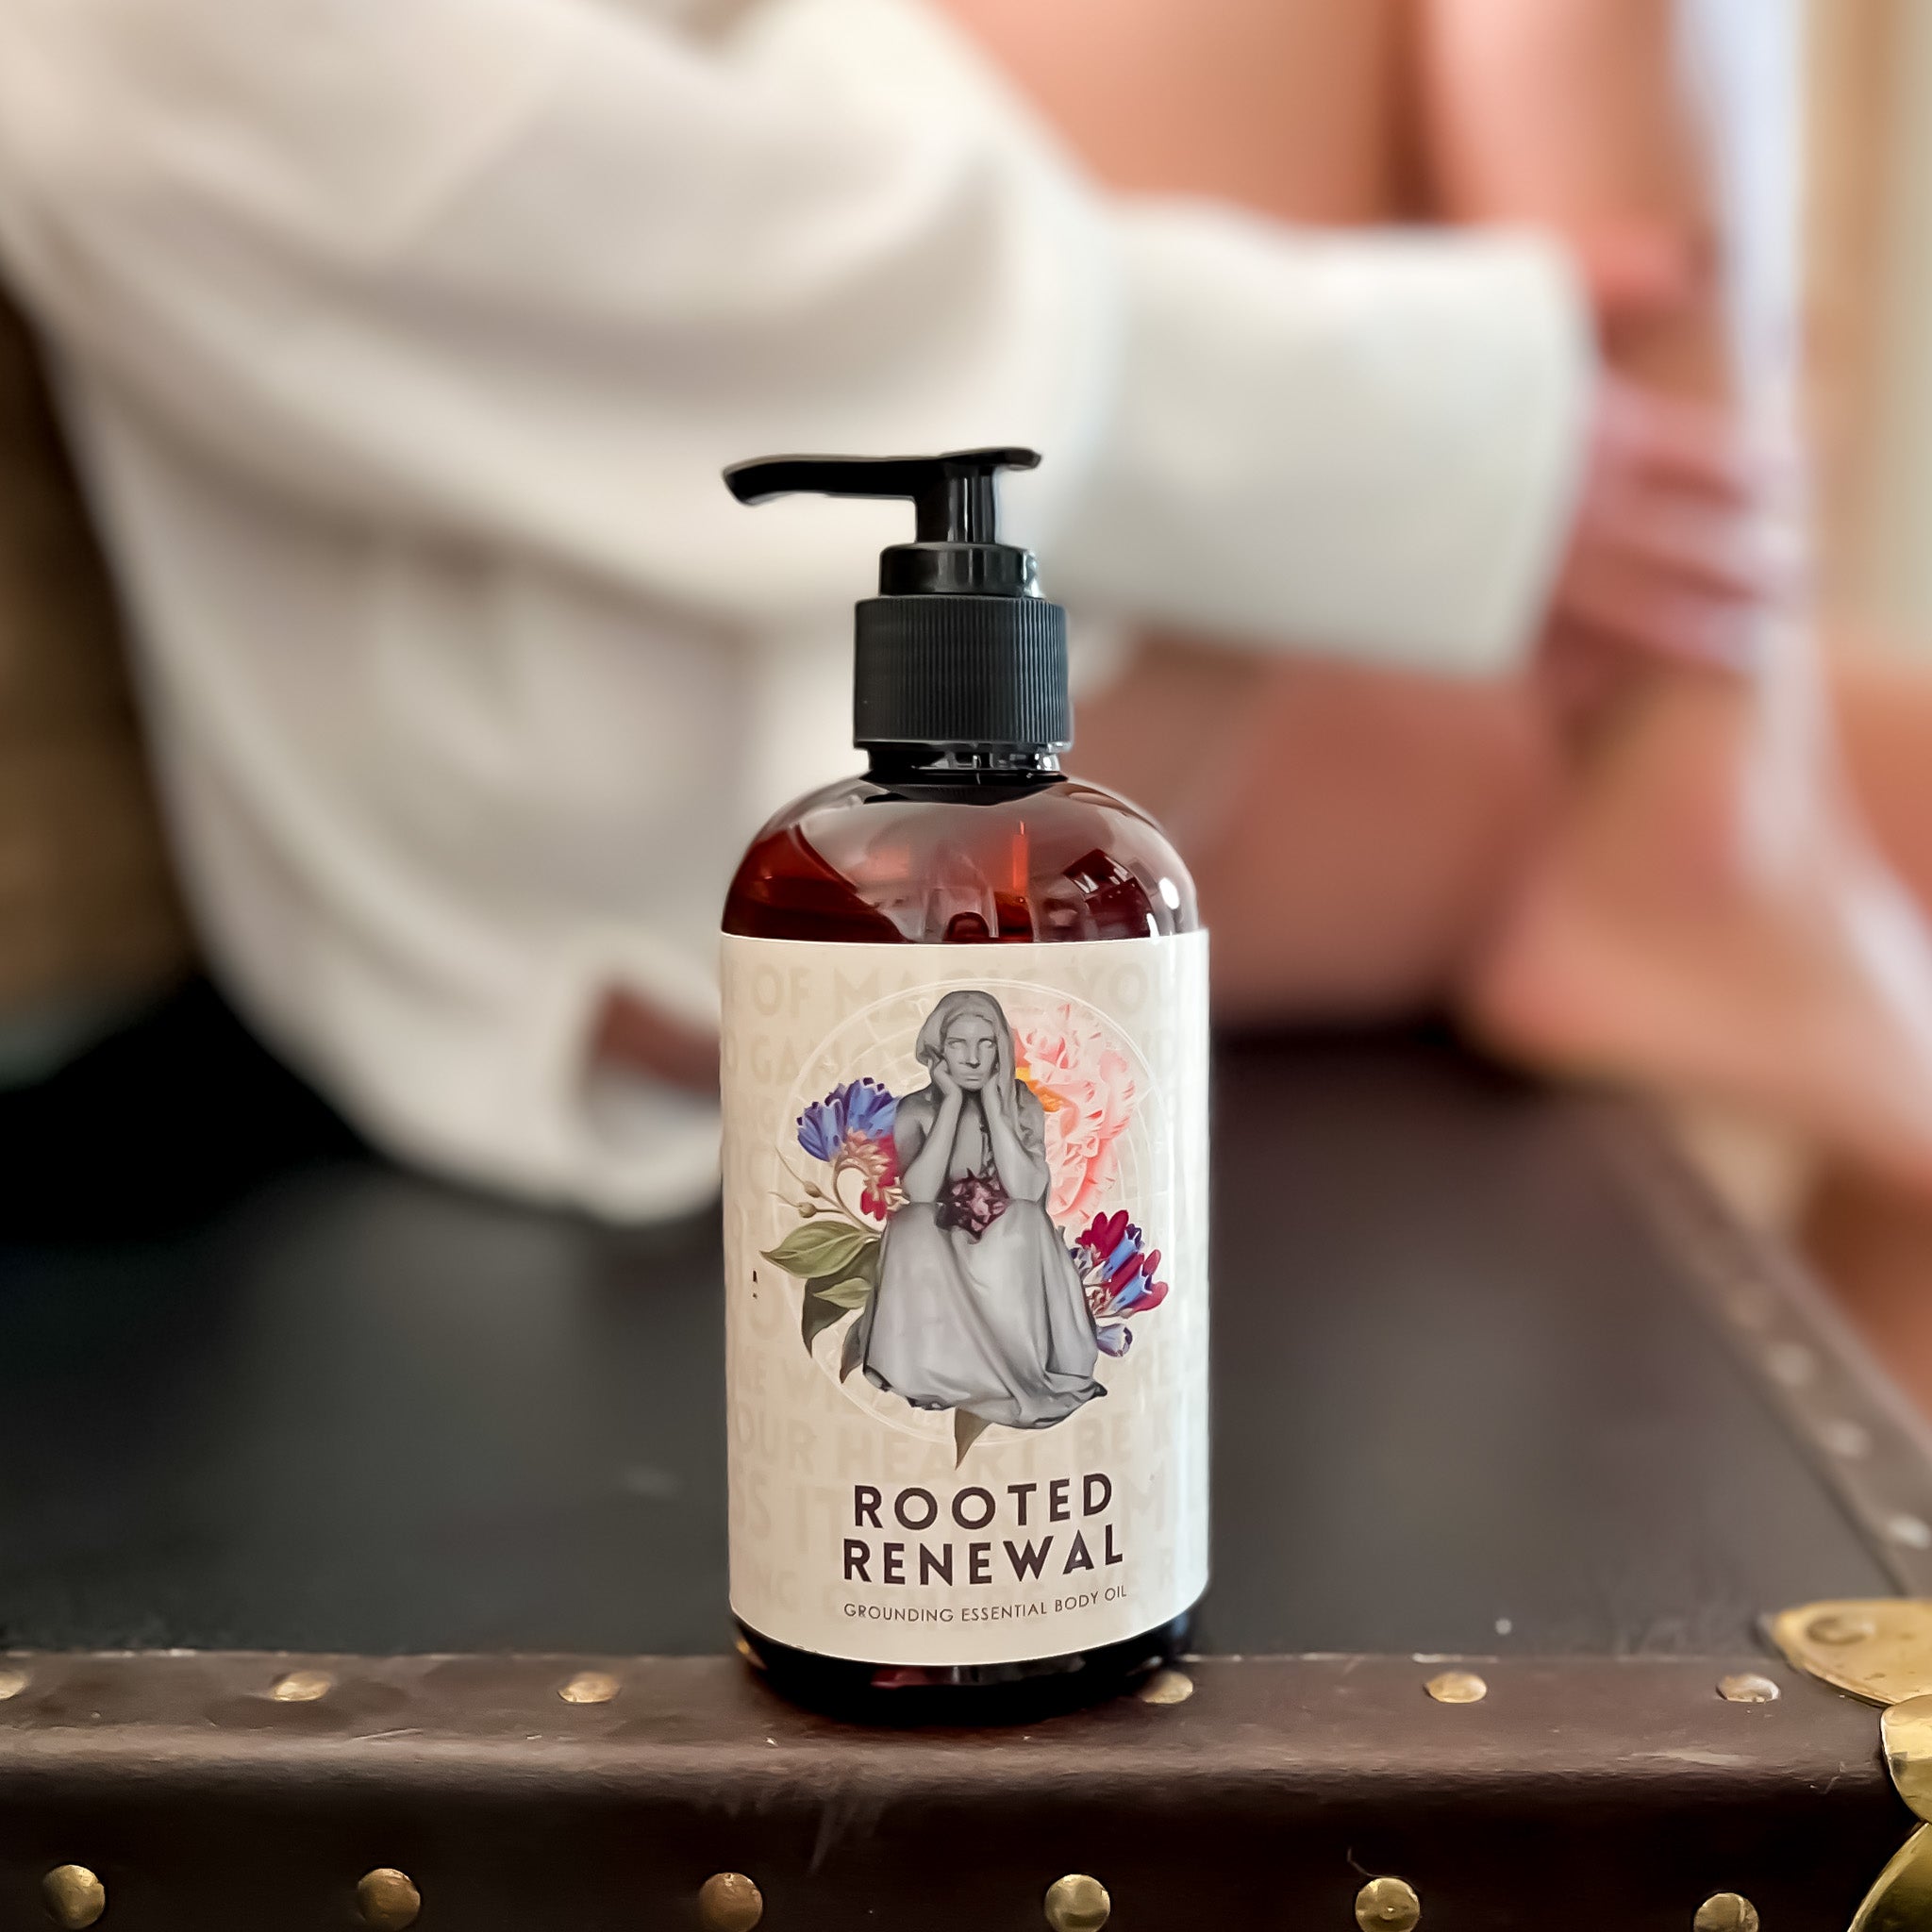 Rooted Renewal Grounding Essential Body Oil